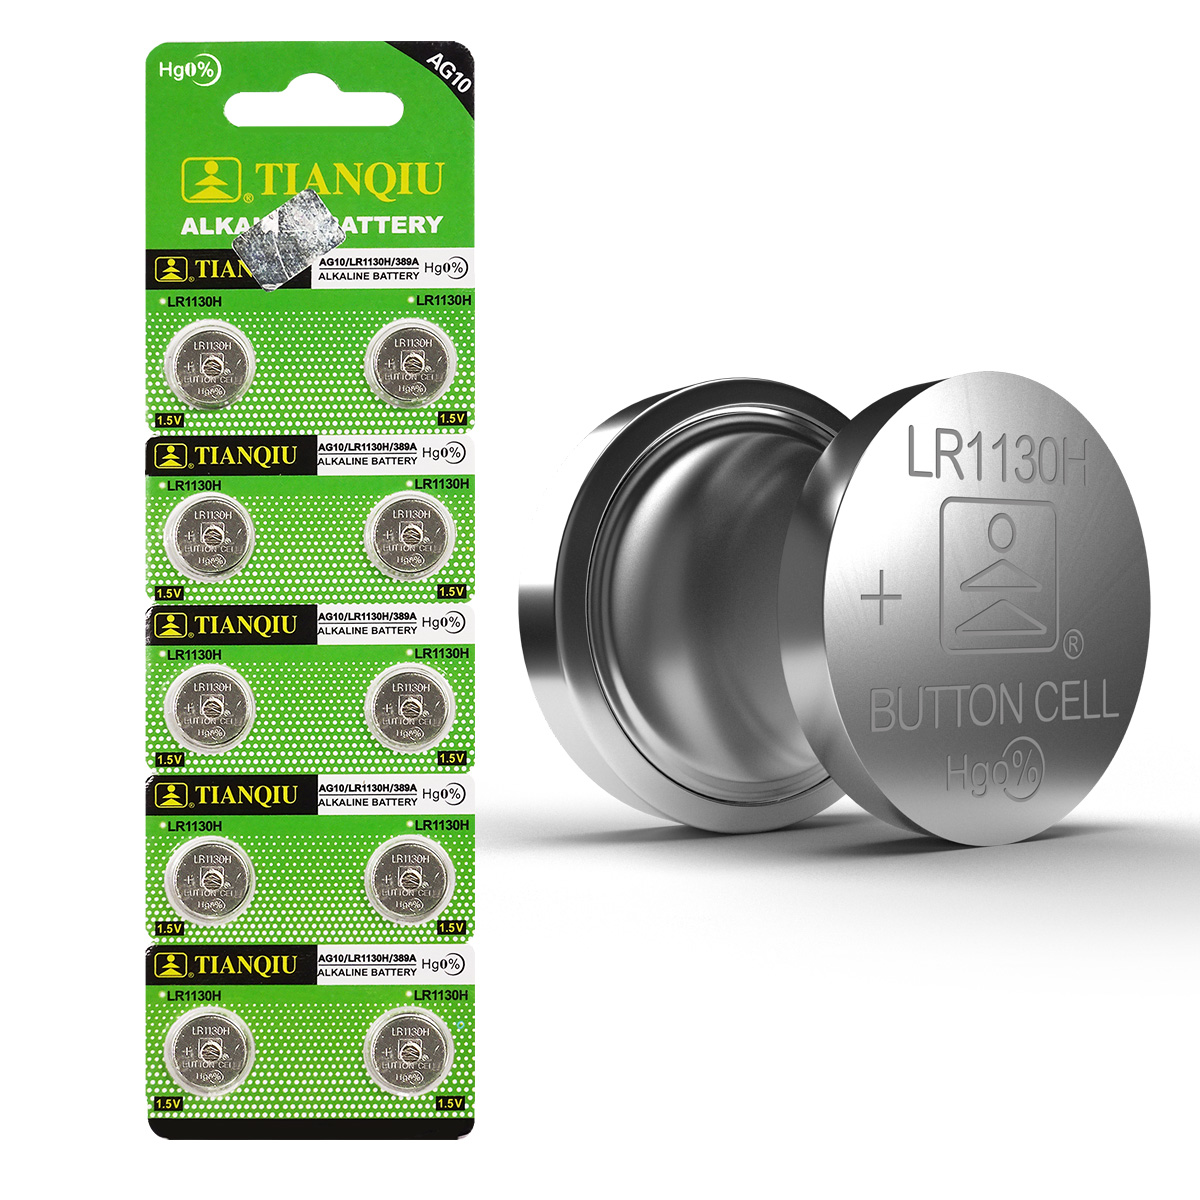 Tianqiu AG10 (LR1130H) Alkaline Button Cell Battery 1.5V (Strip of 10)